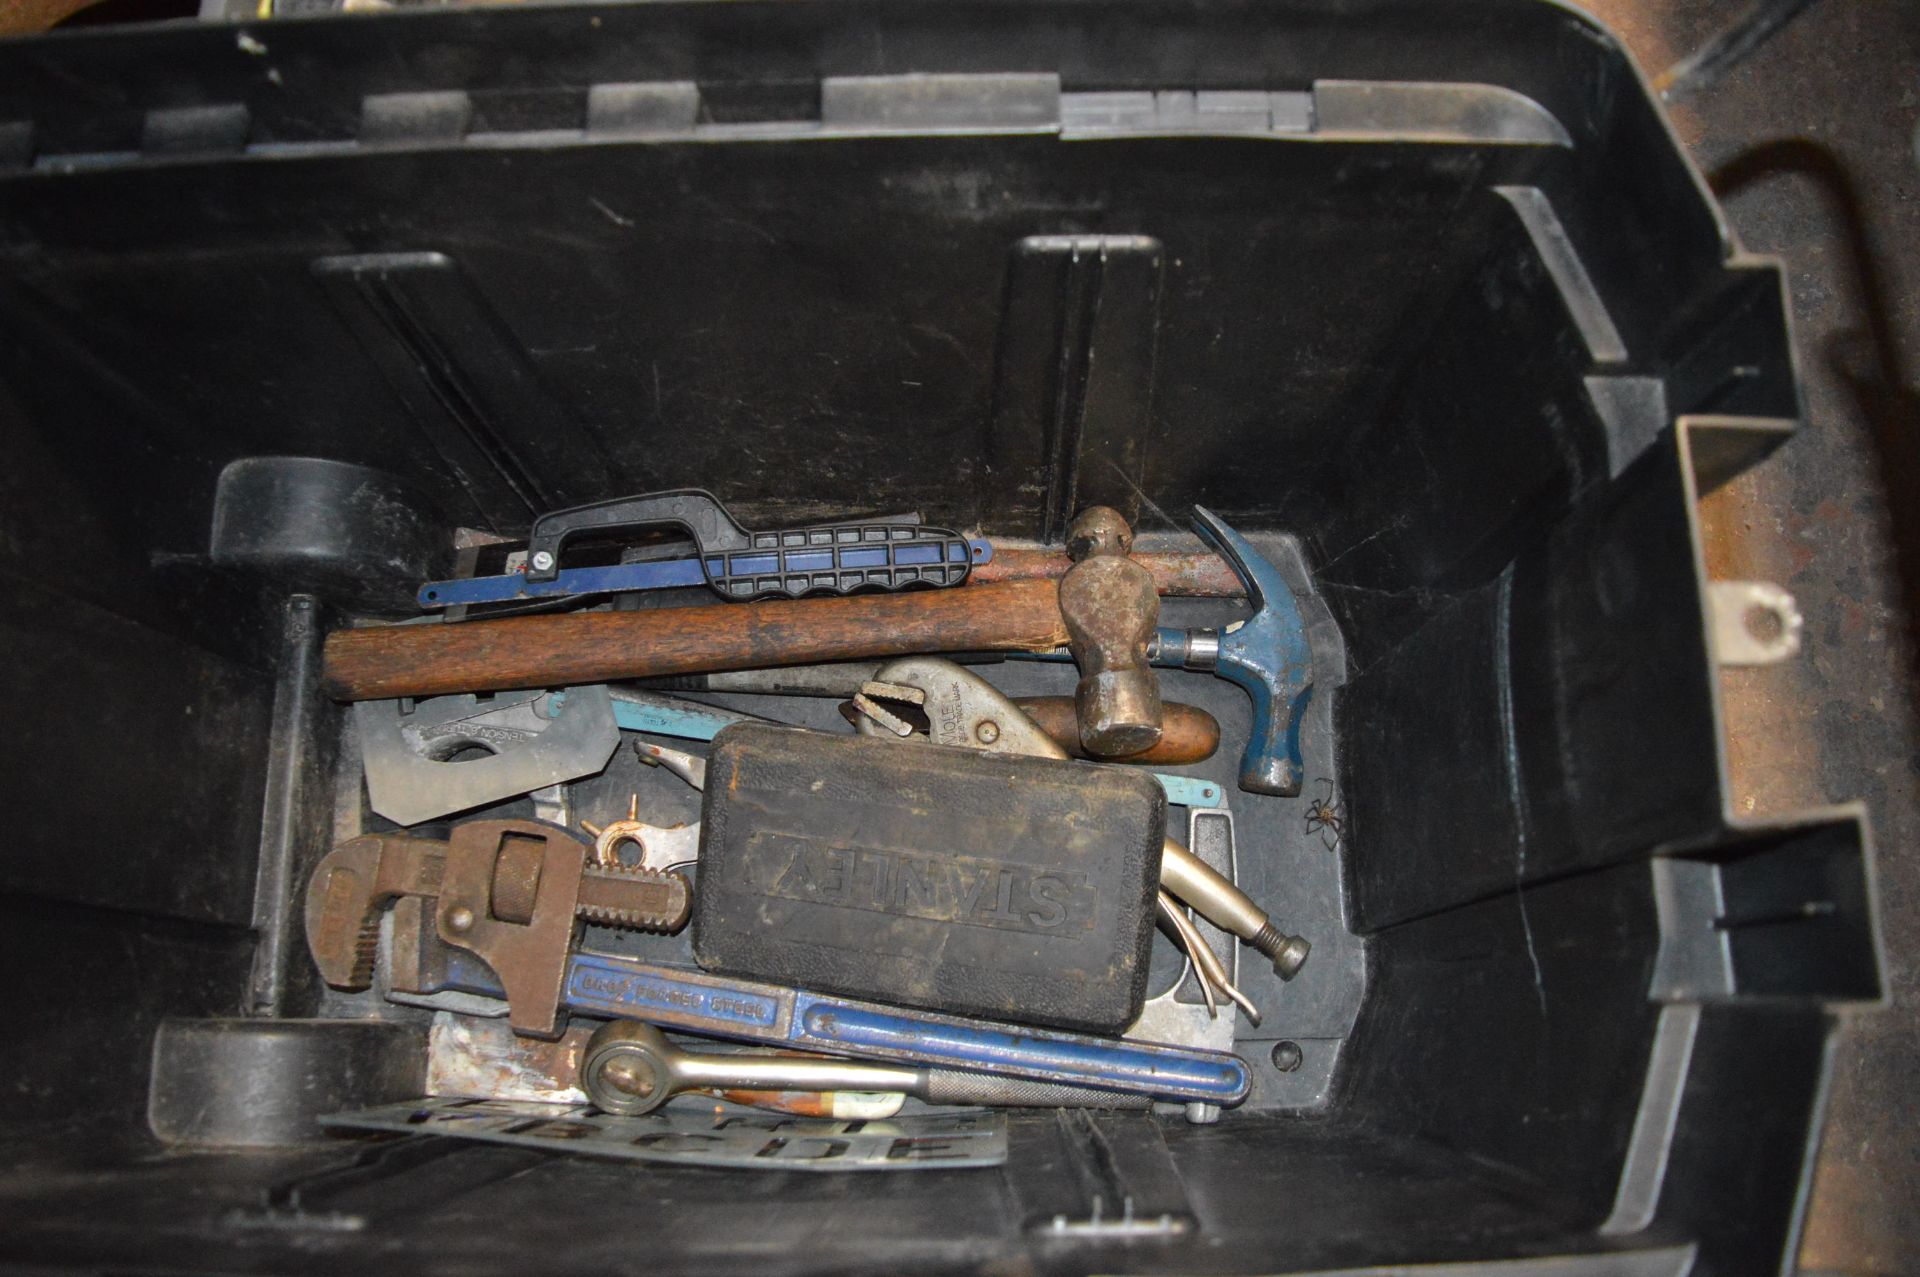 Stanley Box Containing Assorted Tools Including Spanners, Ratchets, Screwdrivers, etc. - Image 6 of 7